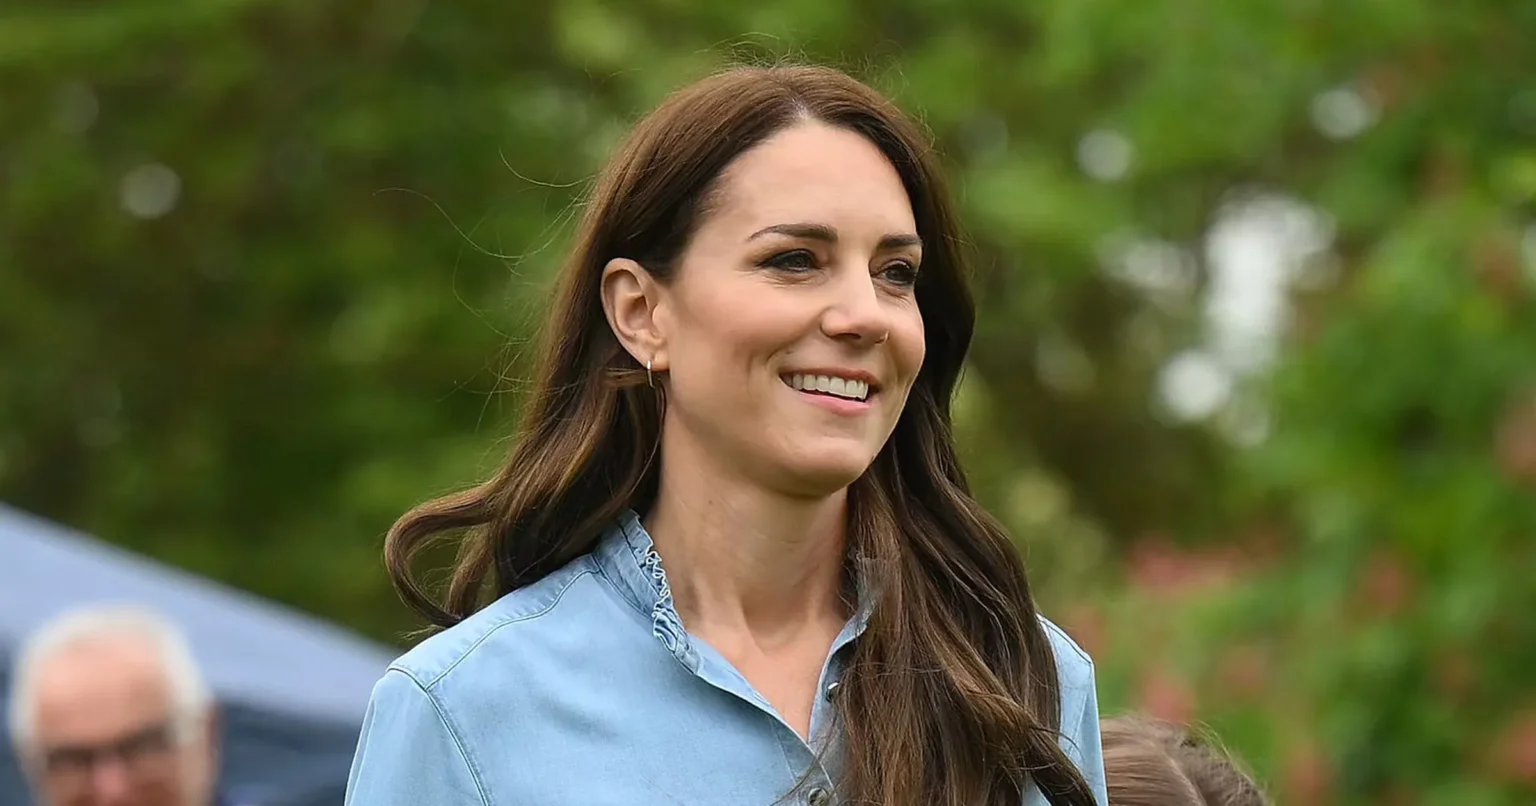 Kate ‘spotted in public for first time in months on trip to farm shop’